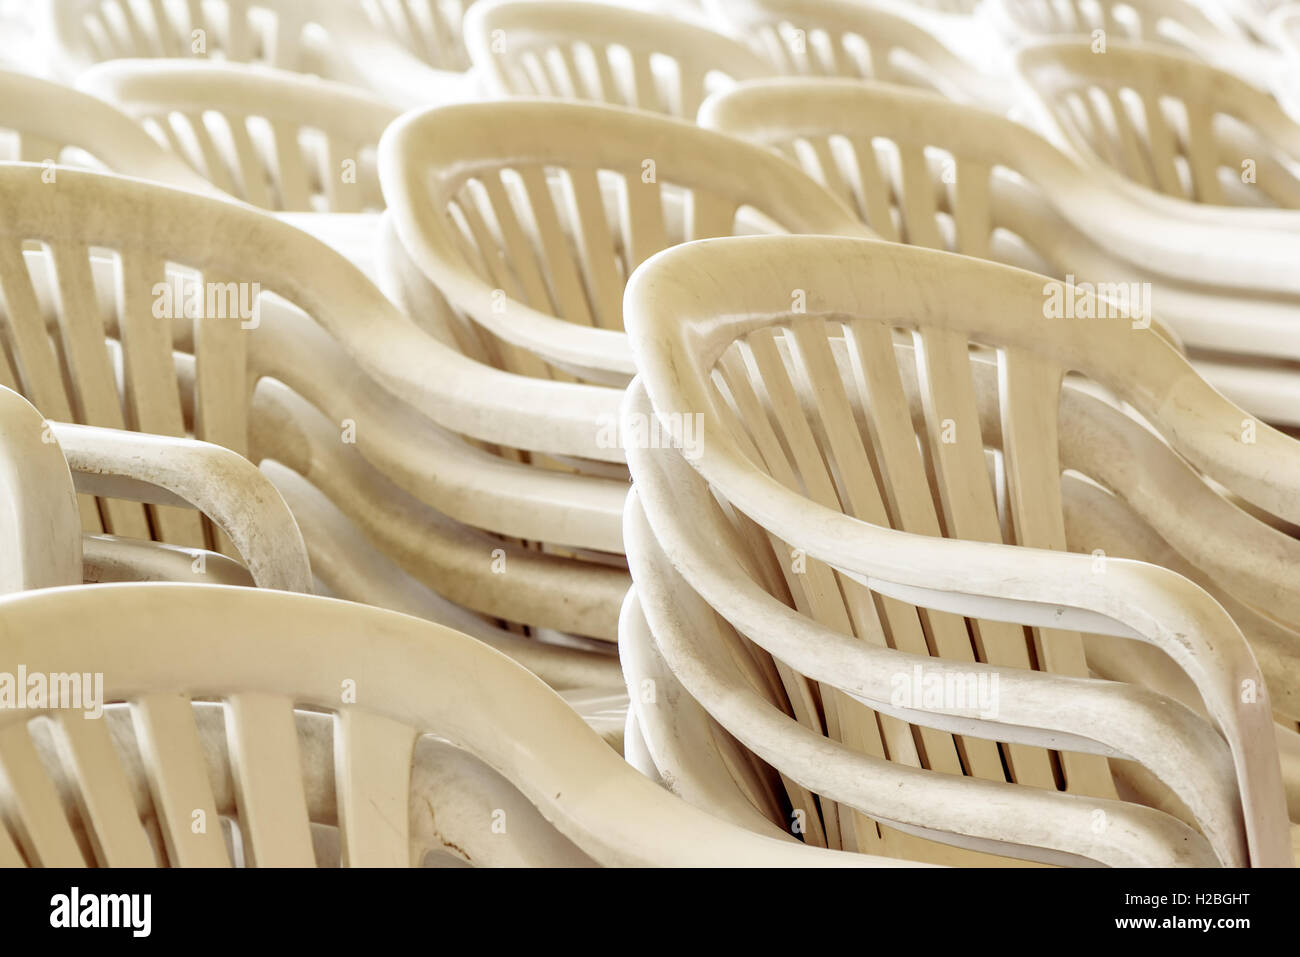 Stacked plastic chairs outdoors, selective focus detail Stock Photo